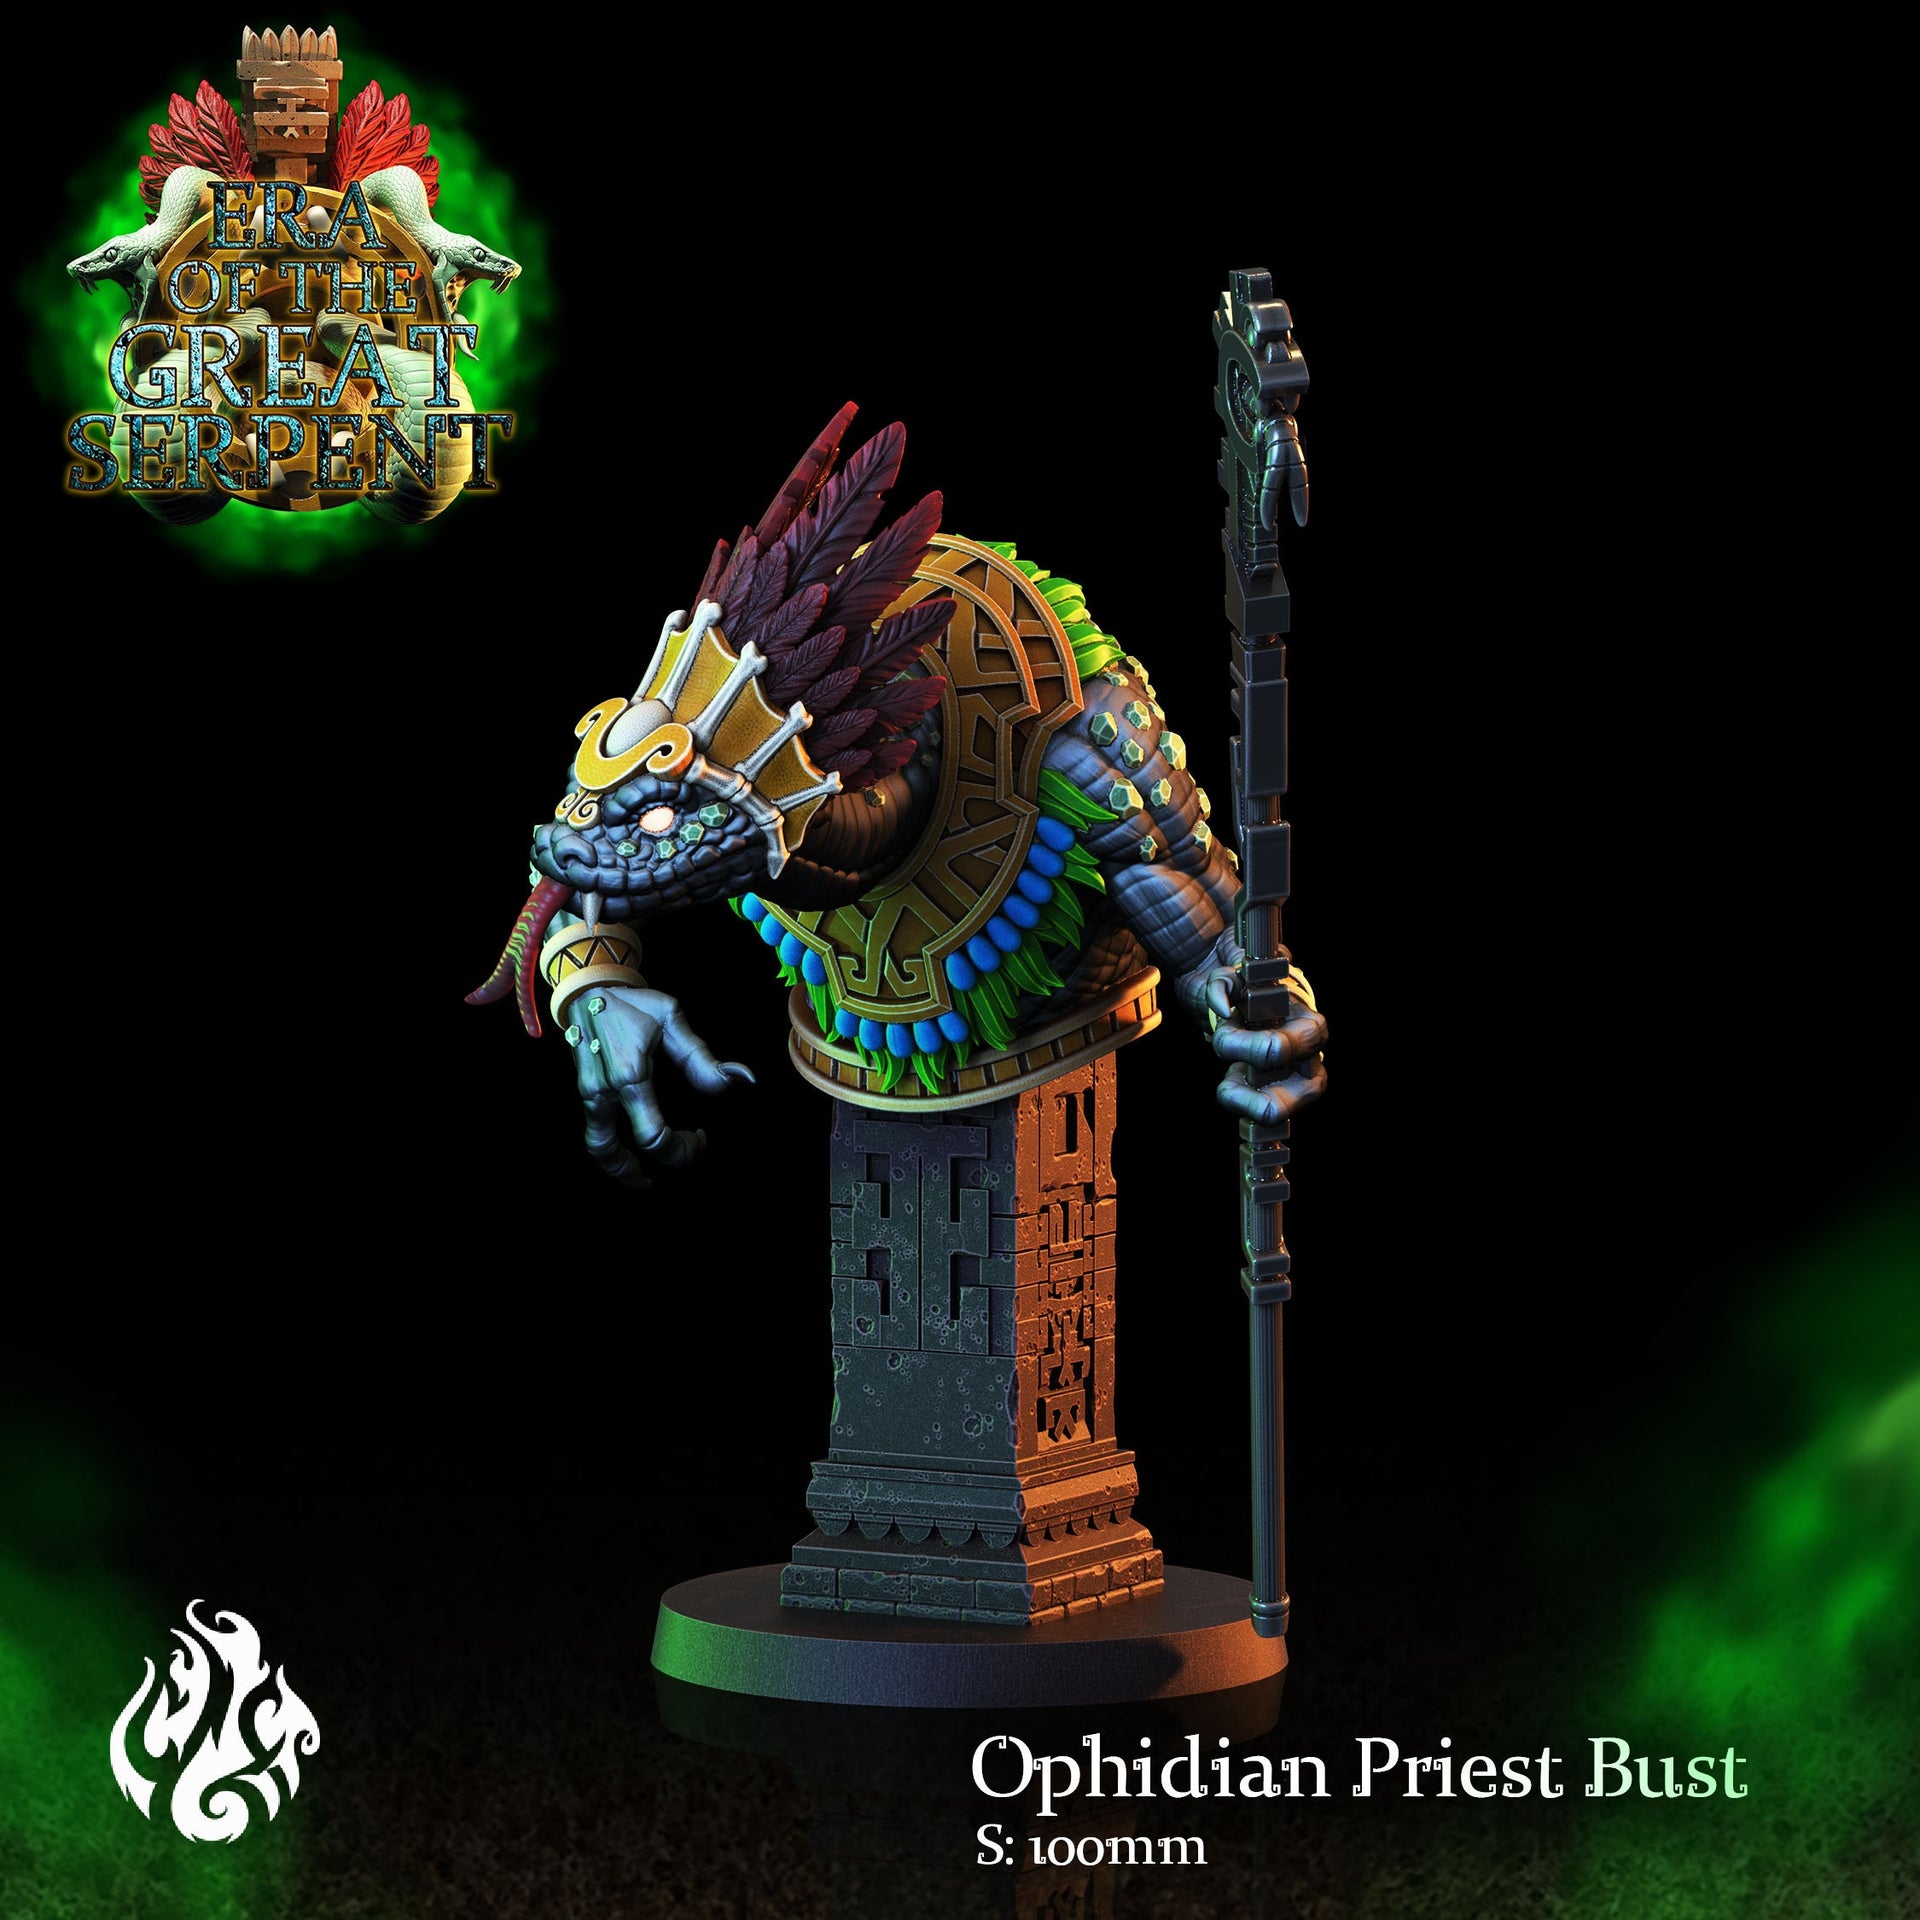 Ophidian Priest Bust - Crippled God Foundry - Era of the Great Serpent  